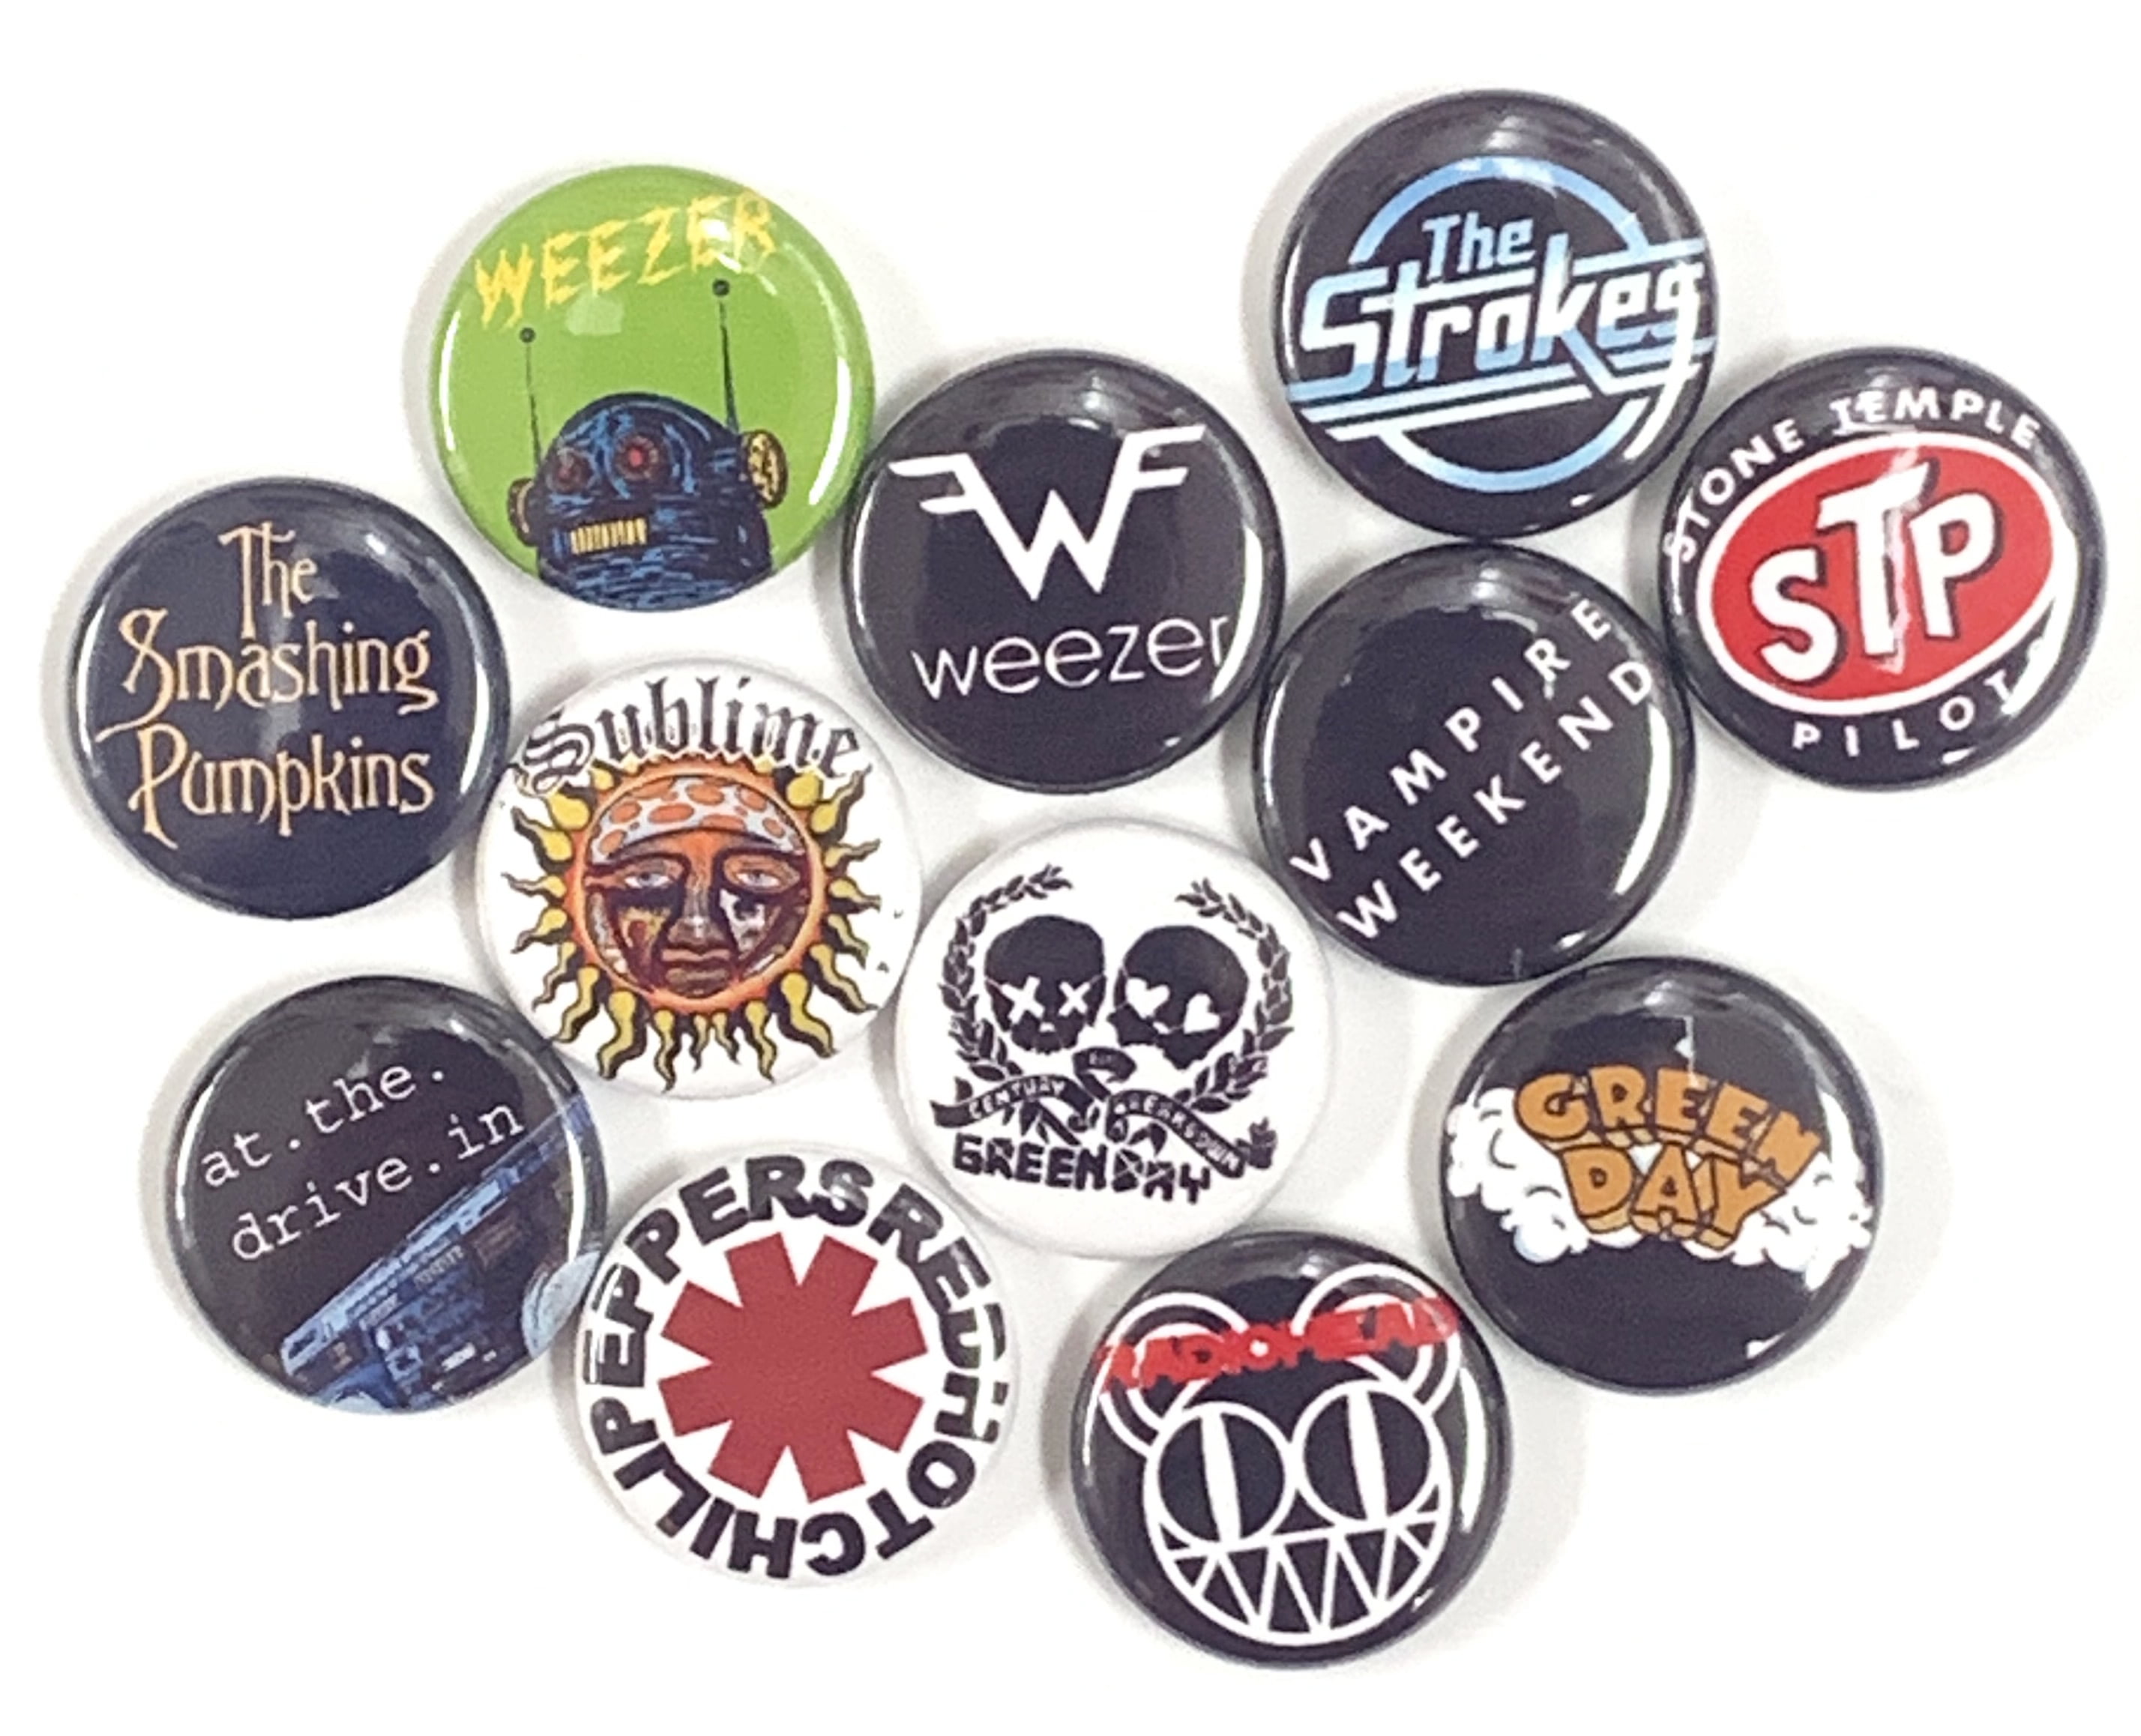 I'M CREATIVE  Lot of 5 BUTTONS pins pinbacks 2 1/4"  badge punk I'M NOT MESSY 